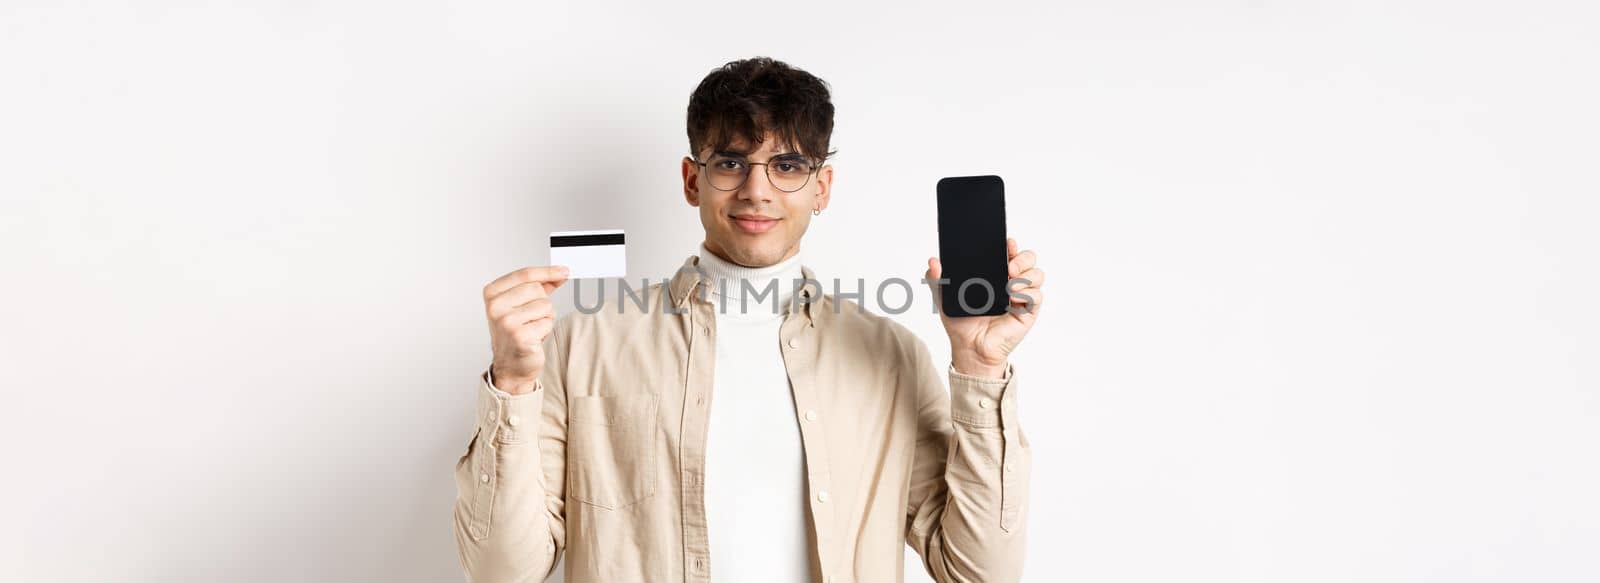 Online shopping. Young modern guy showing plastic credit card and empty smartphone screen, demonstrate account, standing on white background.